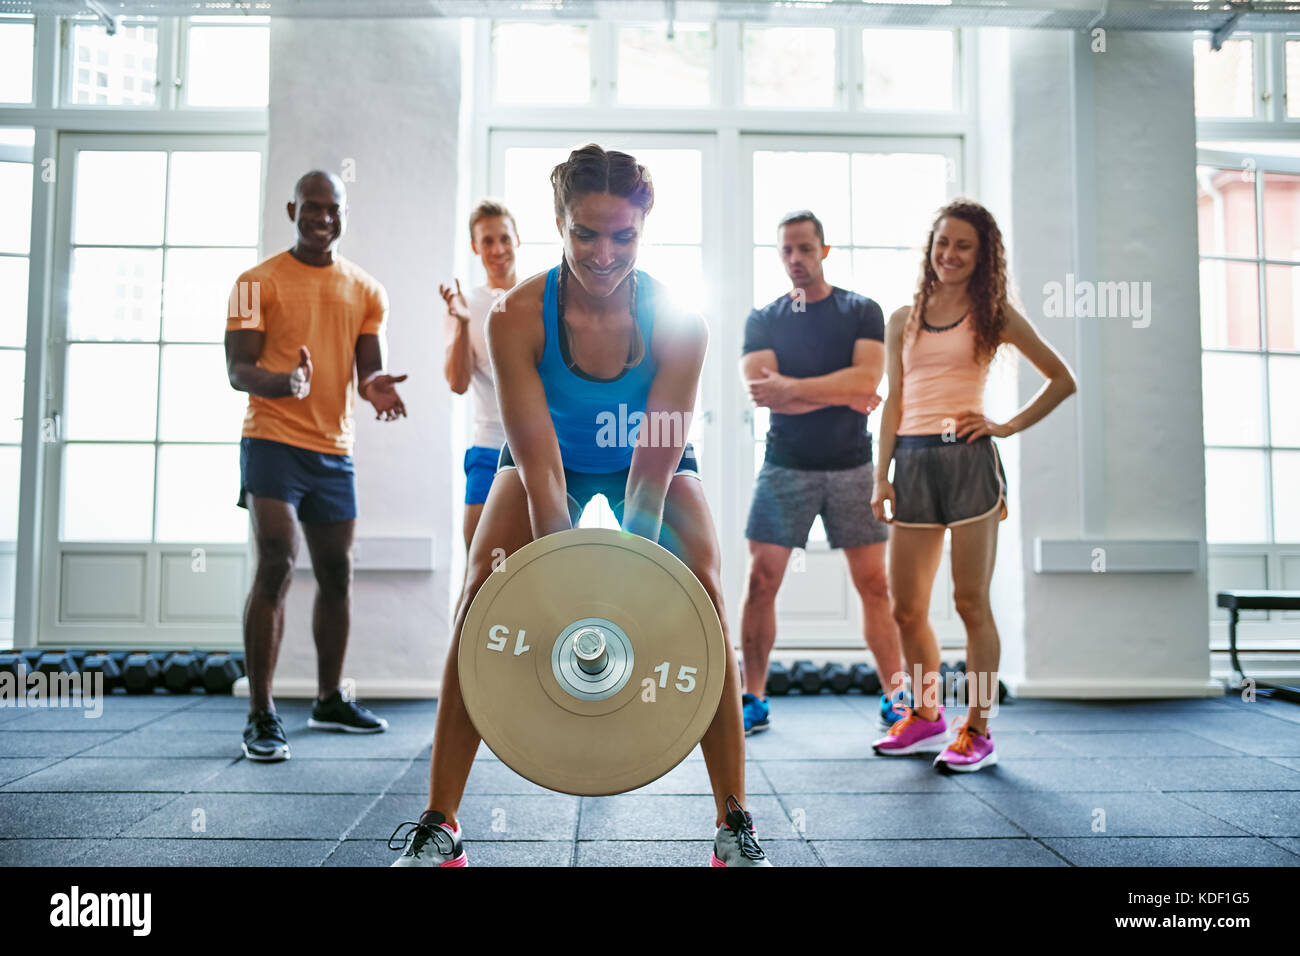 Group of young people cheering on their female friend exercising with weights while working out together in a gym Stock Photo